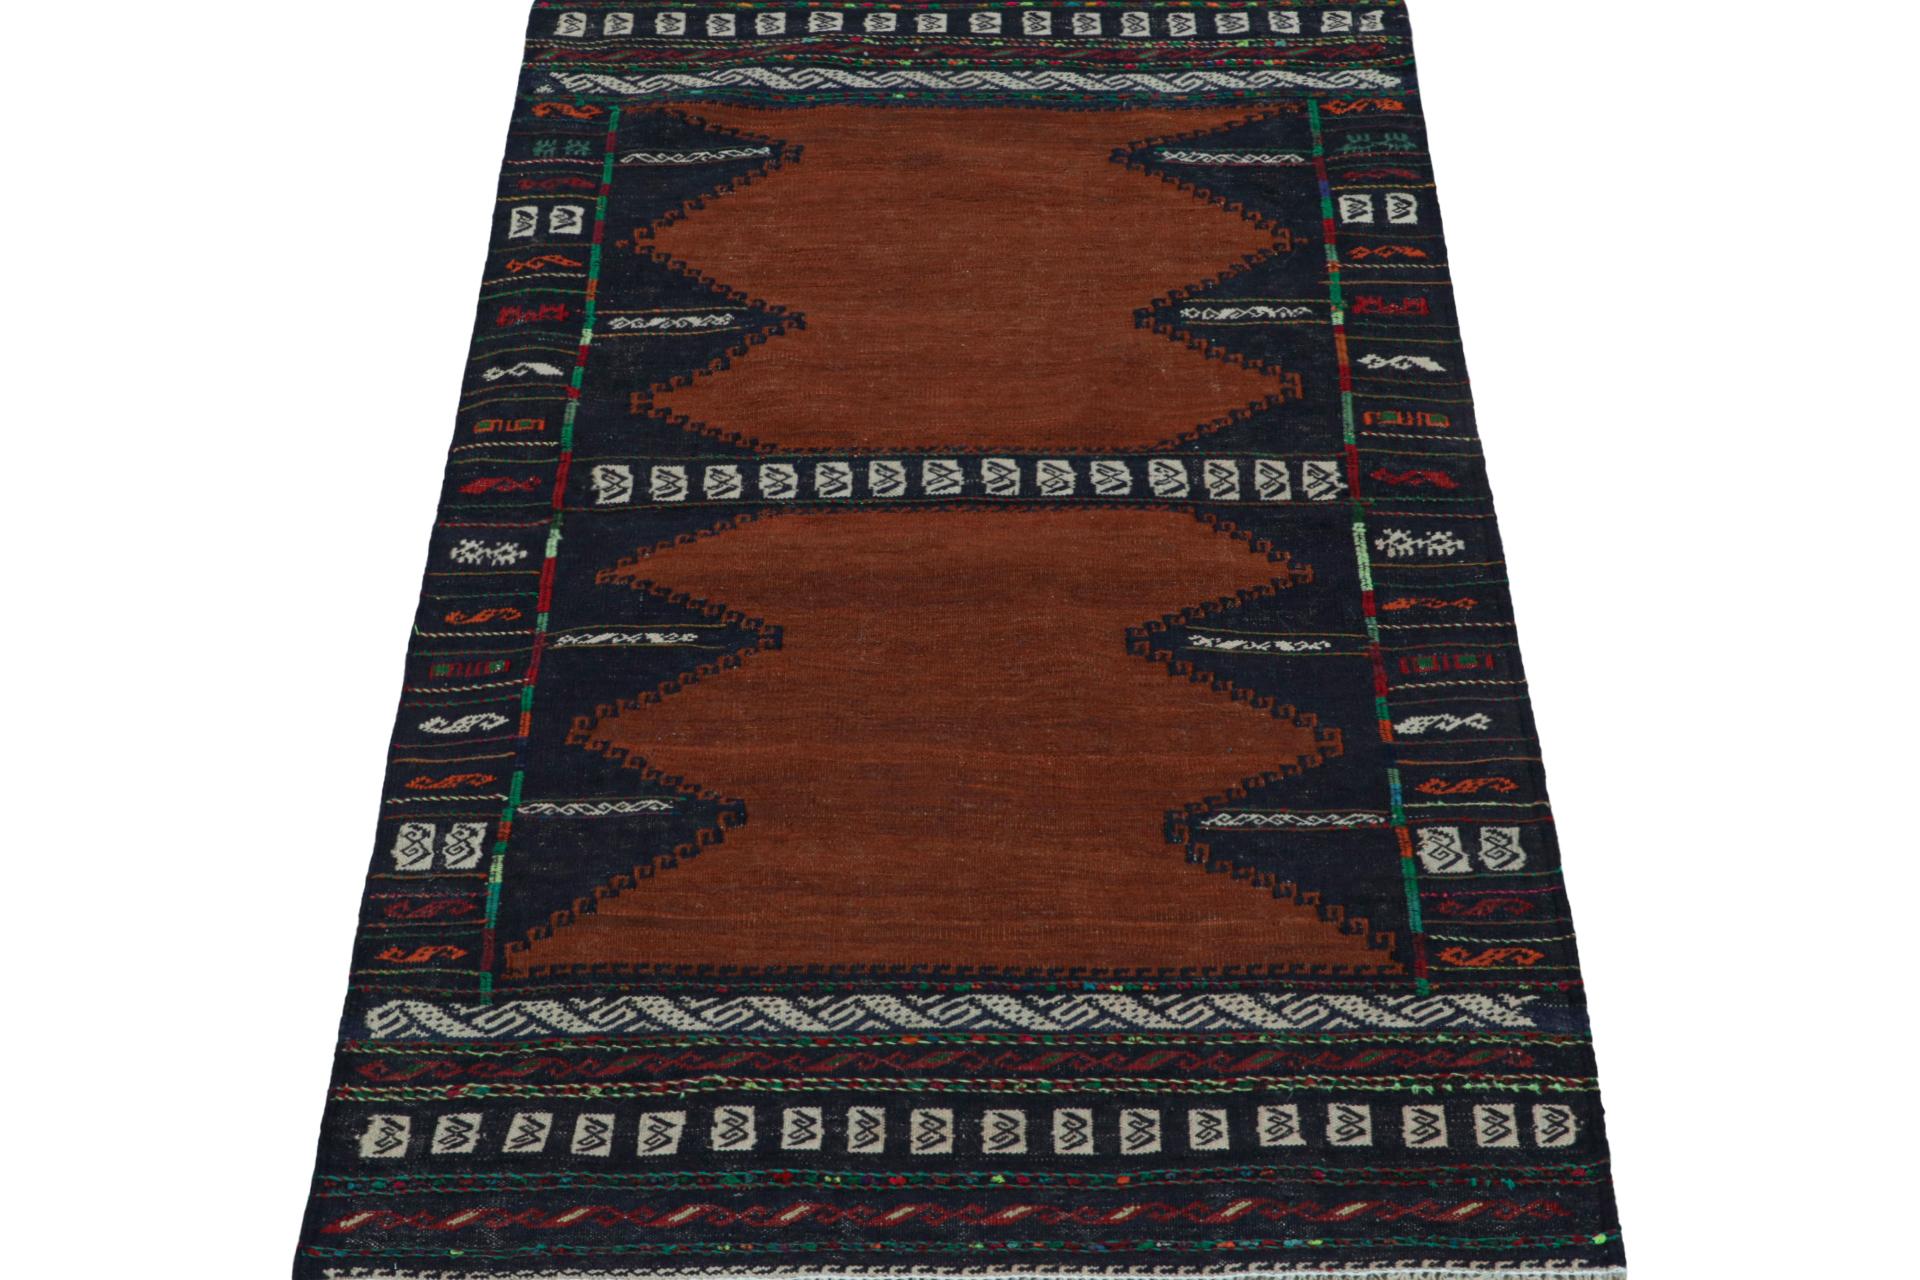 Tribal Vintage Afghan Baluch Kilim Scatter Rug, with Geometric Borders from Rug & Kilim For Sale